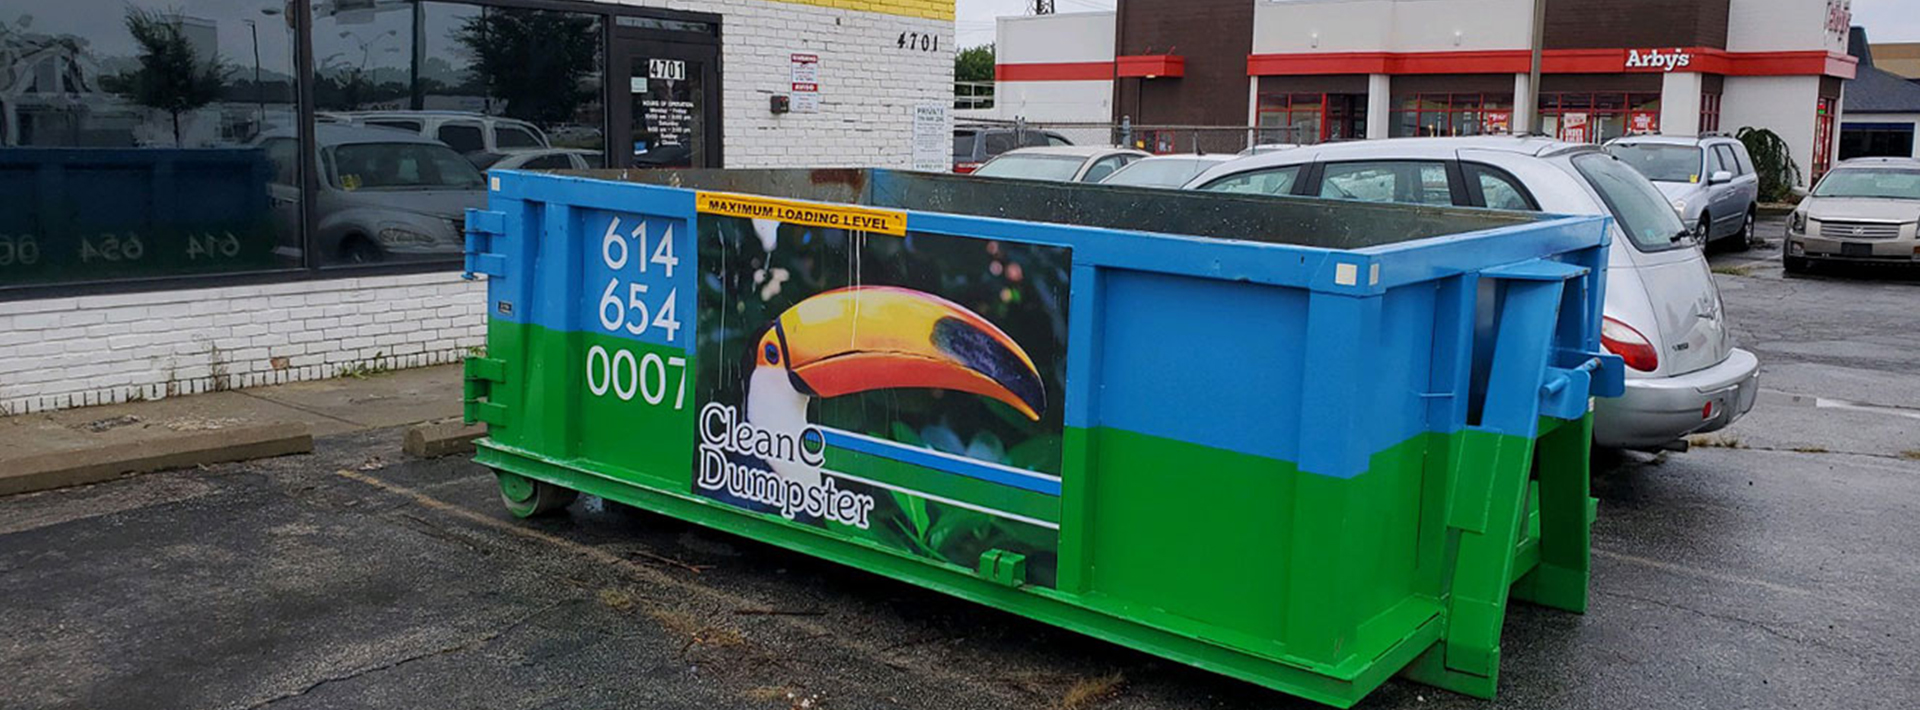 CleanE Dumpster LLC -  Dumpster Rental and Waste Management Company in Columbus, Ohio